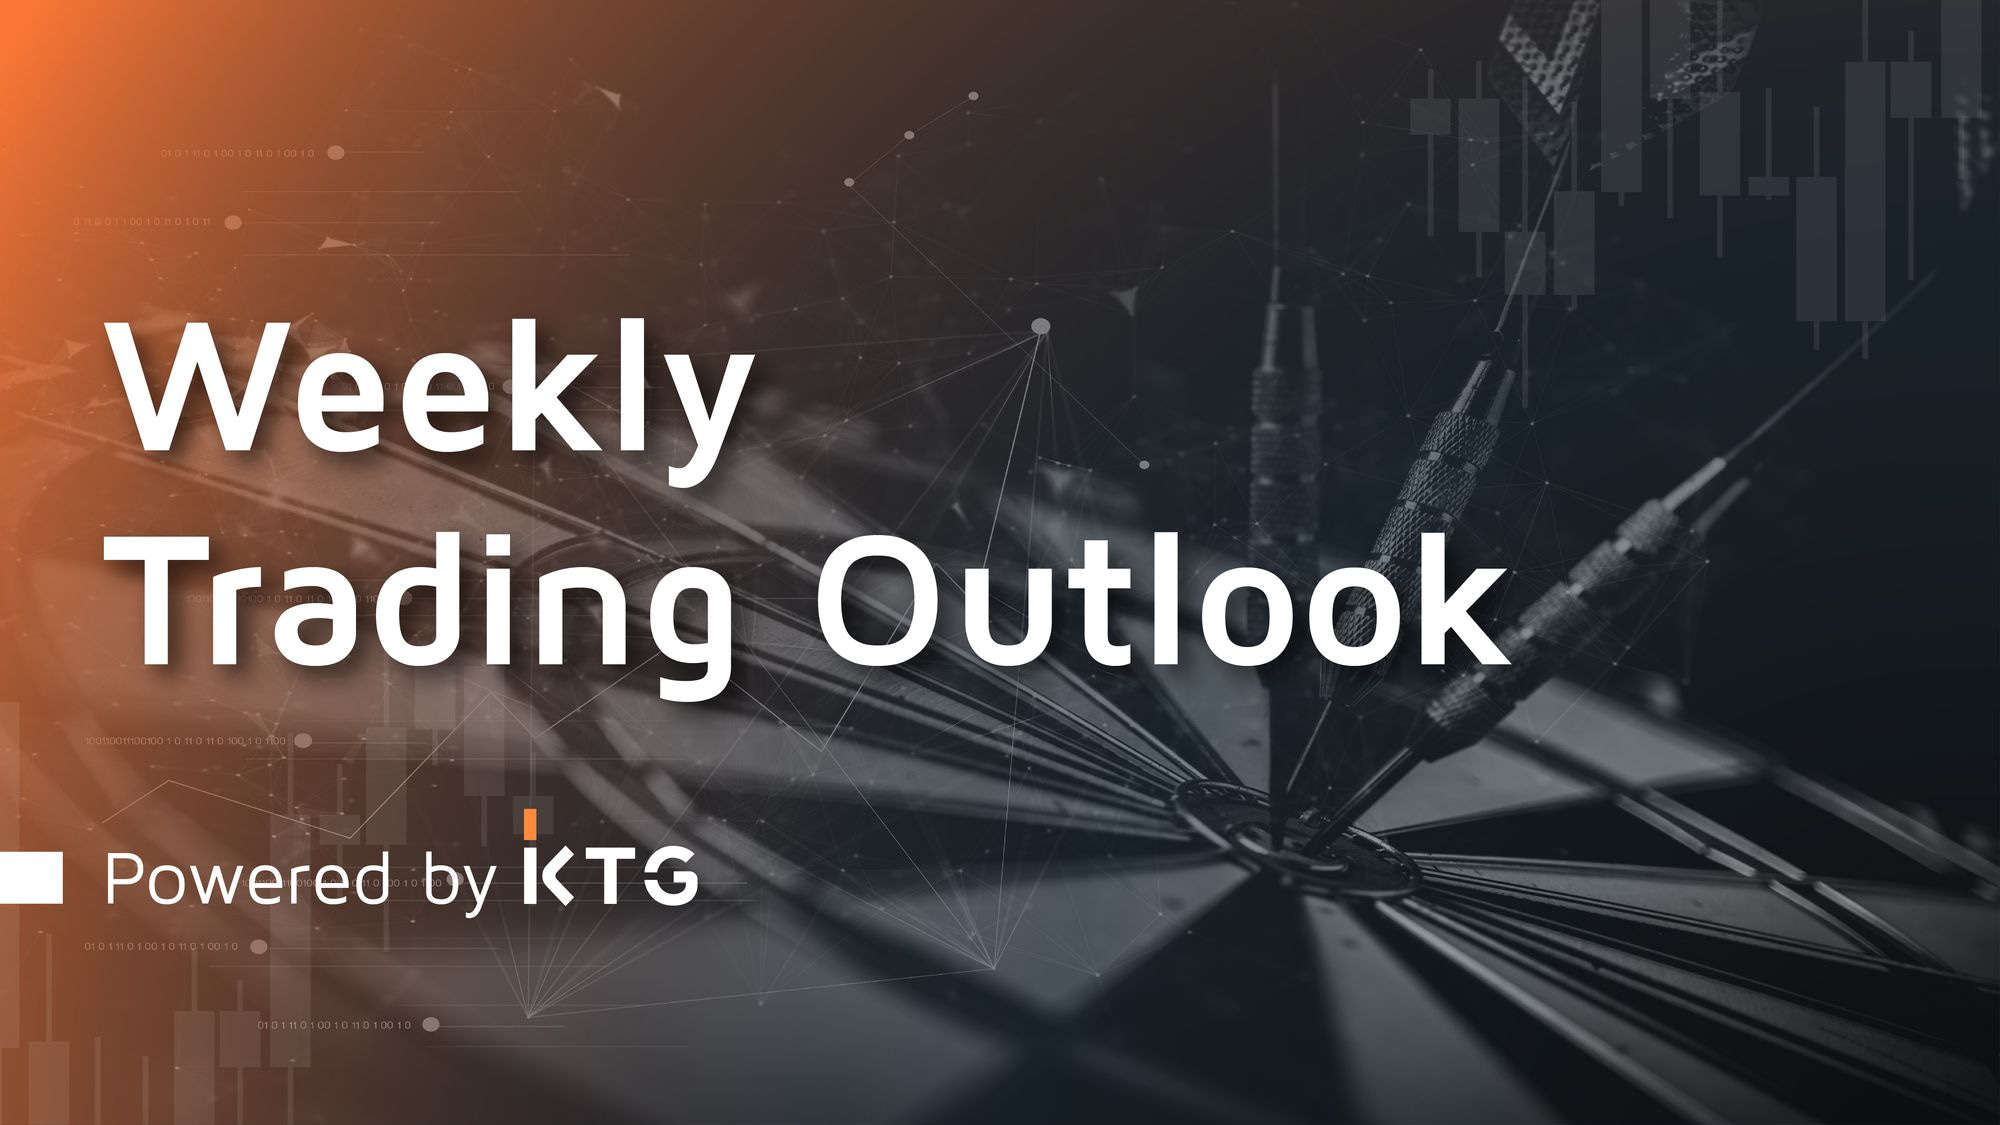 What will unfold for BTC in the week ahead? - #TradingOutlook Powered by KTG